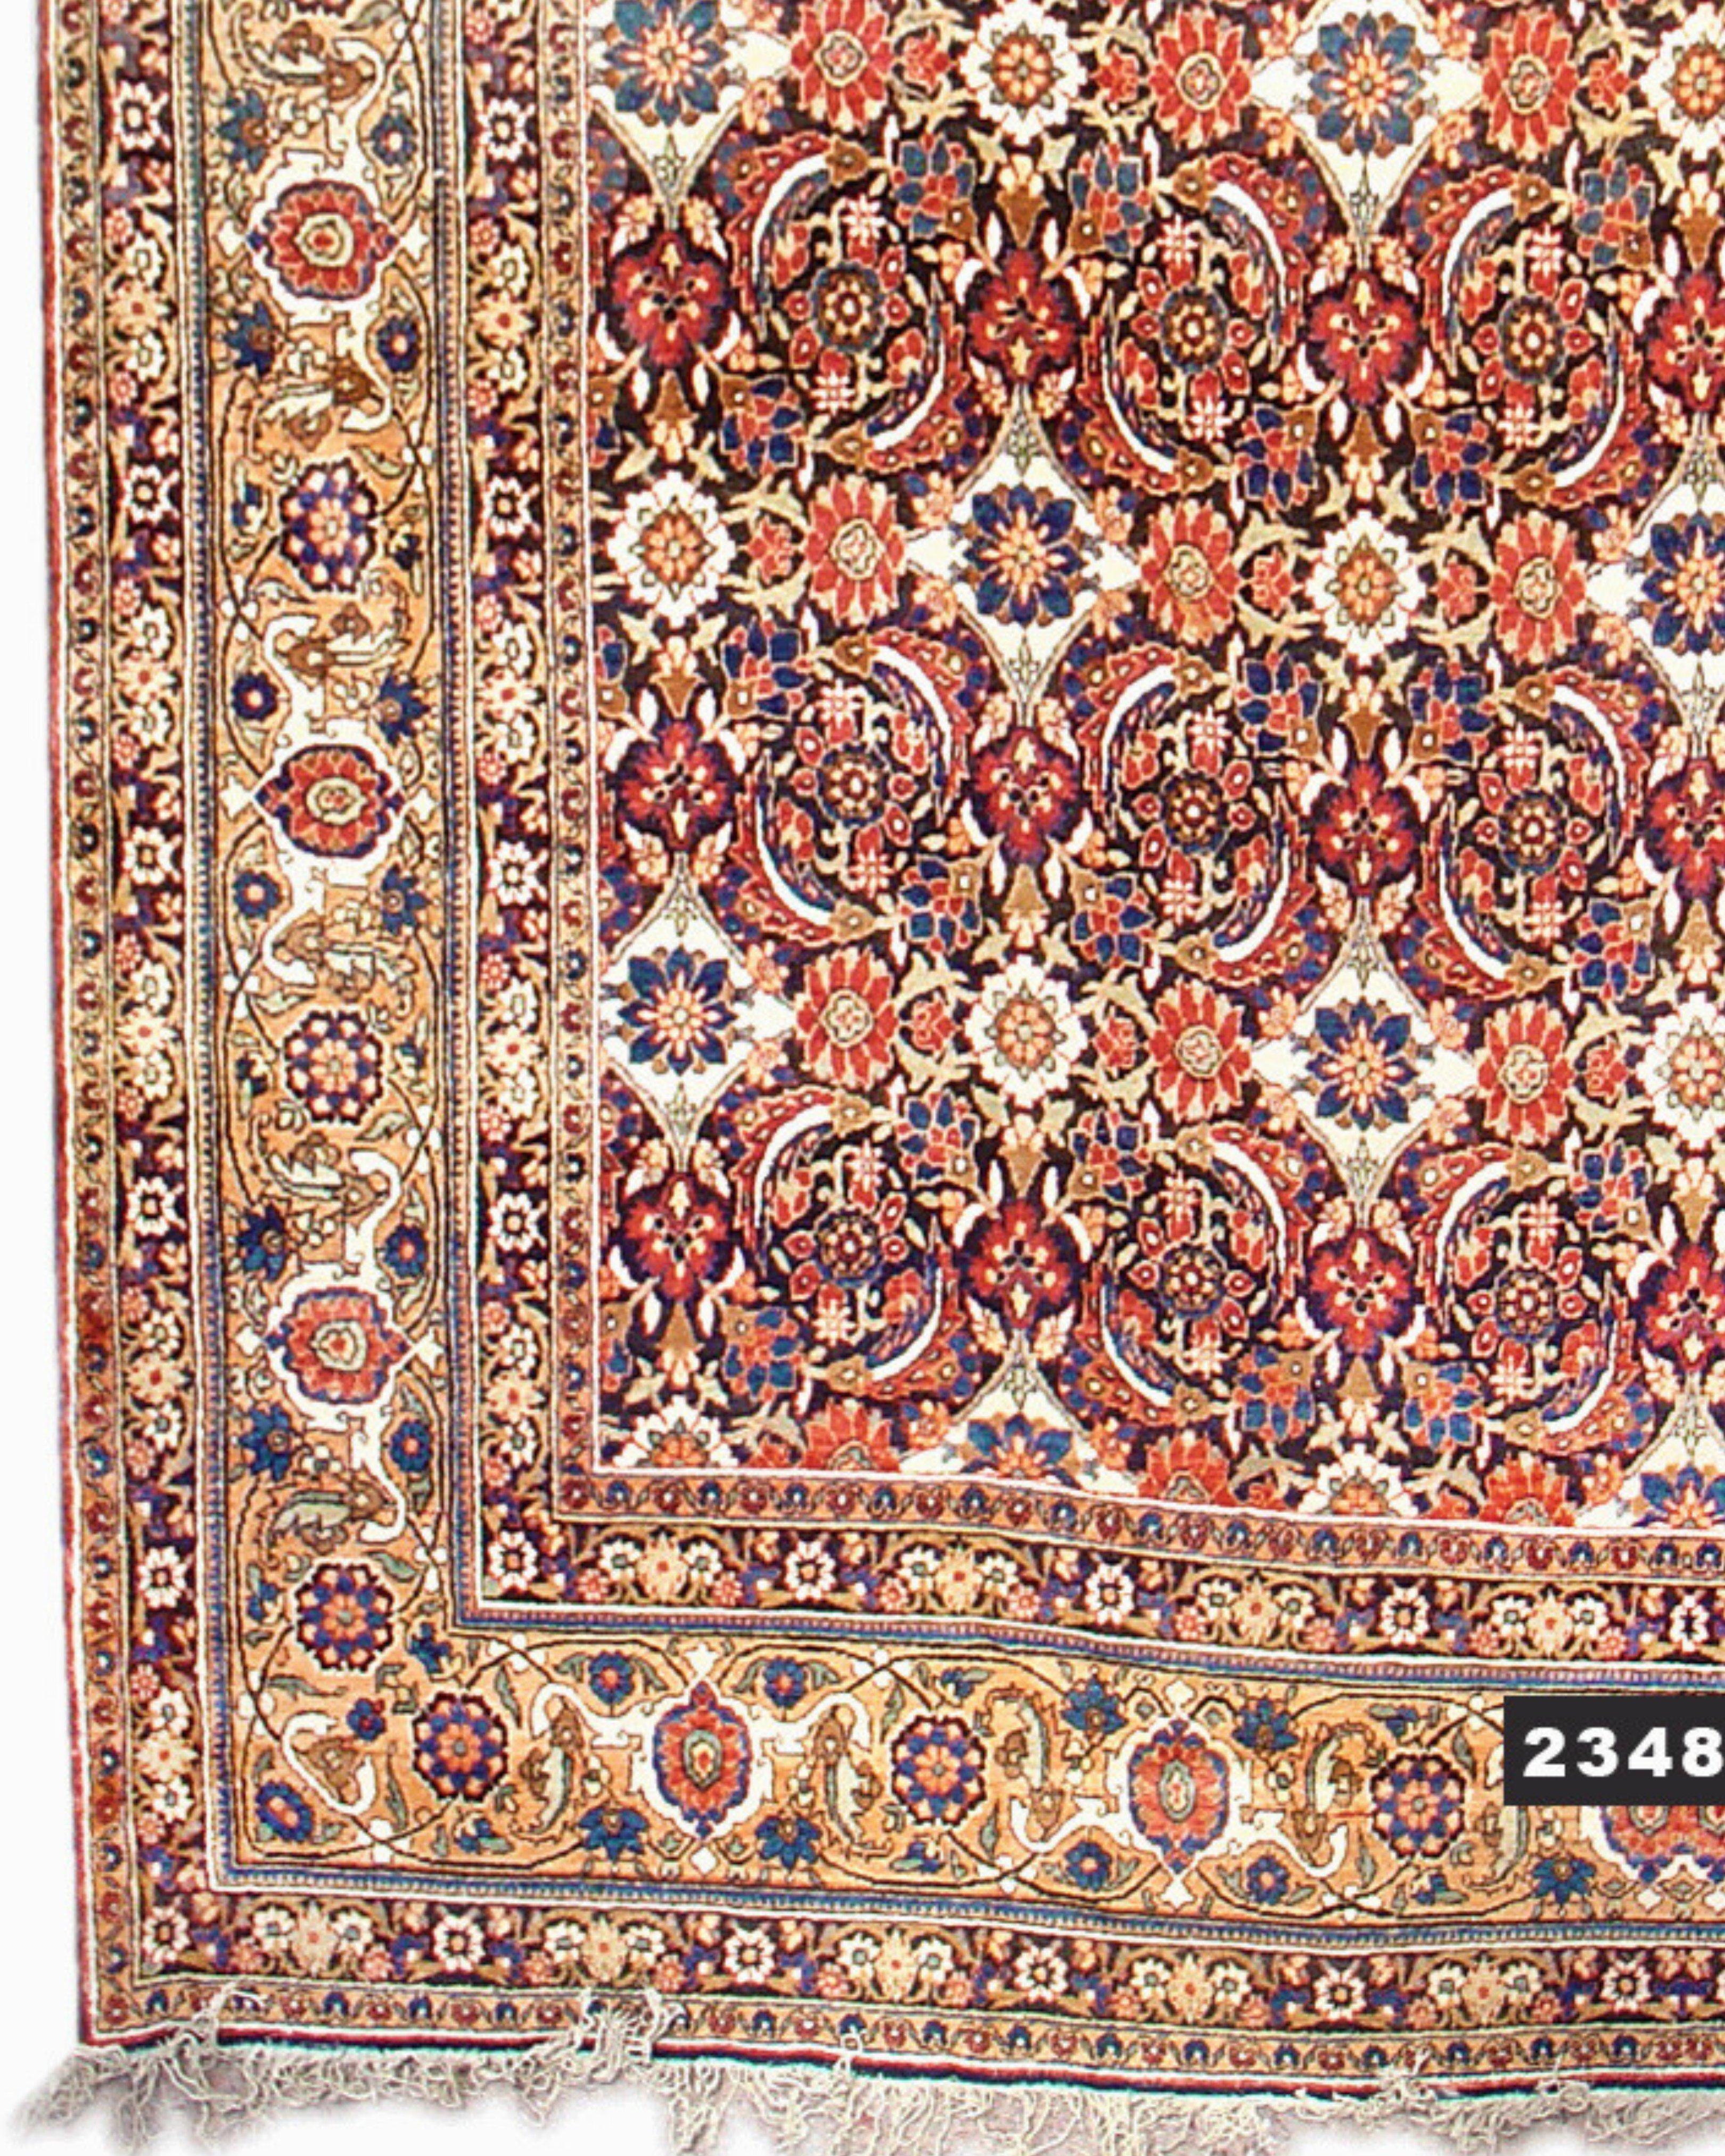 Antique Persian Yezd Carpet, c. 1900 In Excellent Condition For Sale In San Francisco, CA